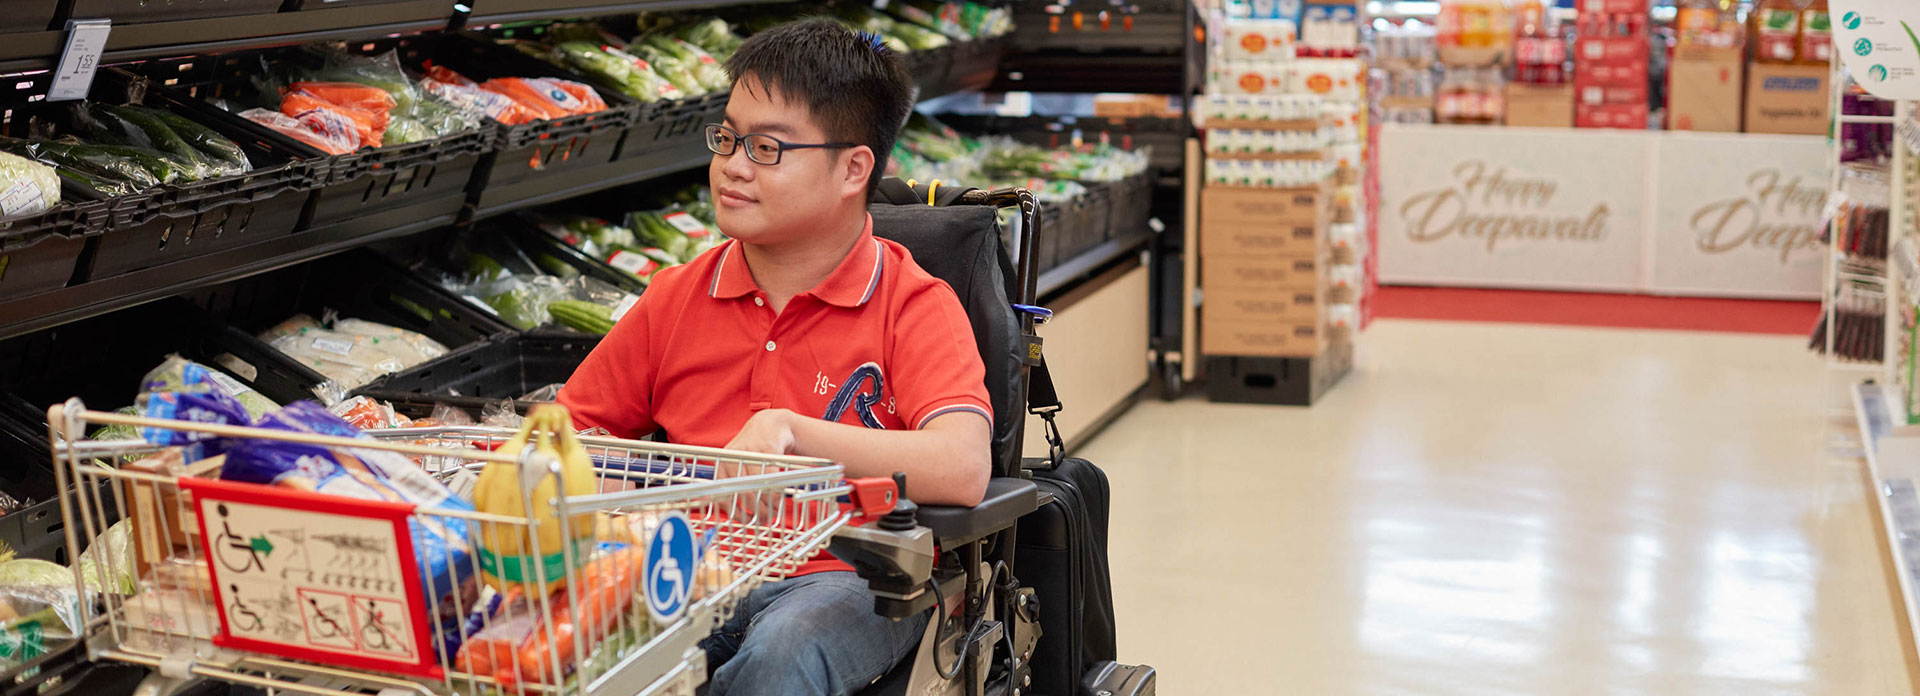 Young man in motorized wheelchair shopping for groceries in the supermarket